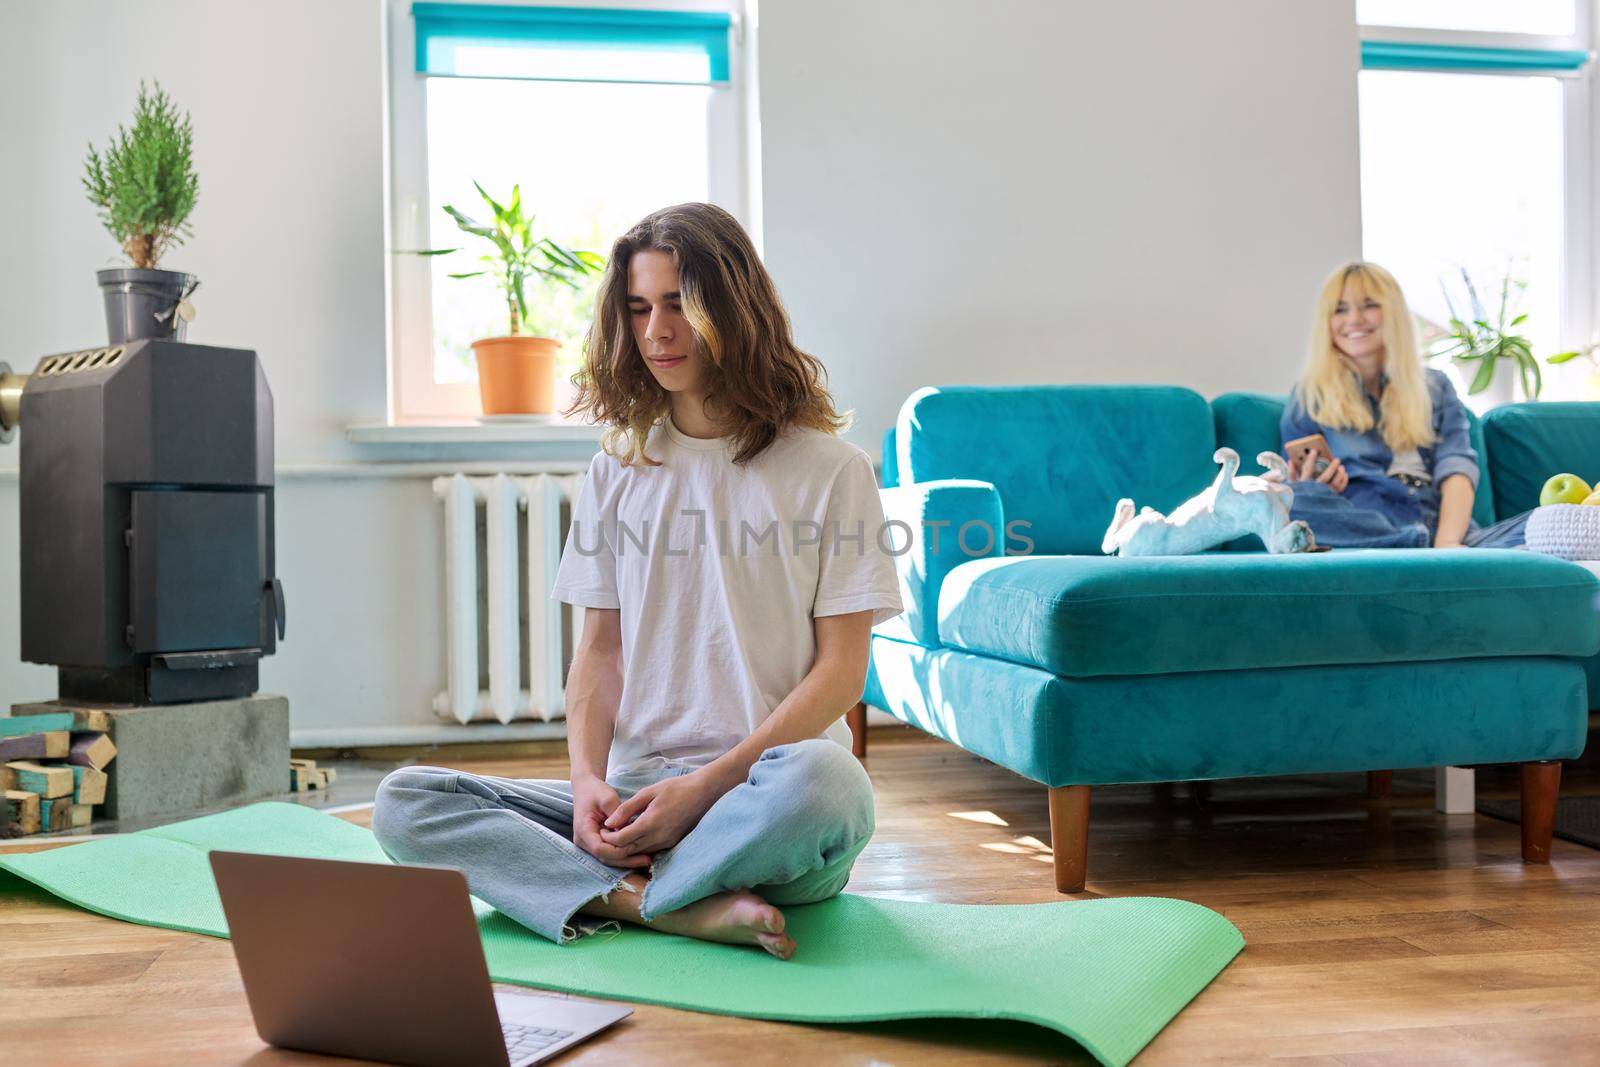 Guy teenager sitting in lotus position on yoga mat at home on floor with laptop by VH-studio